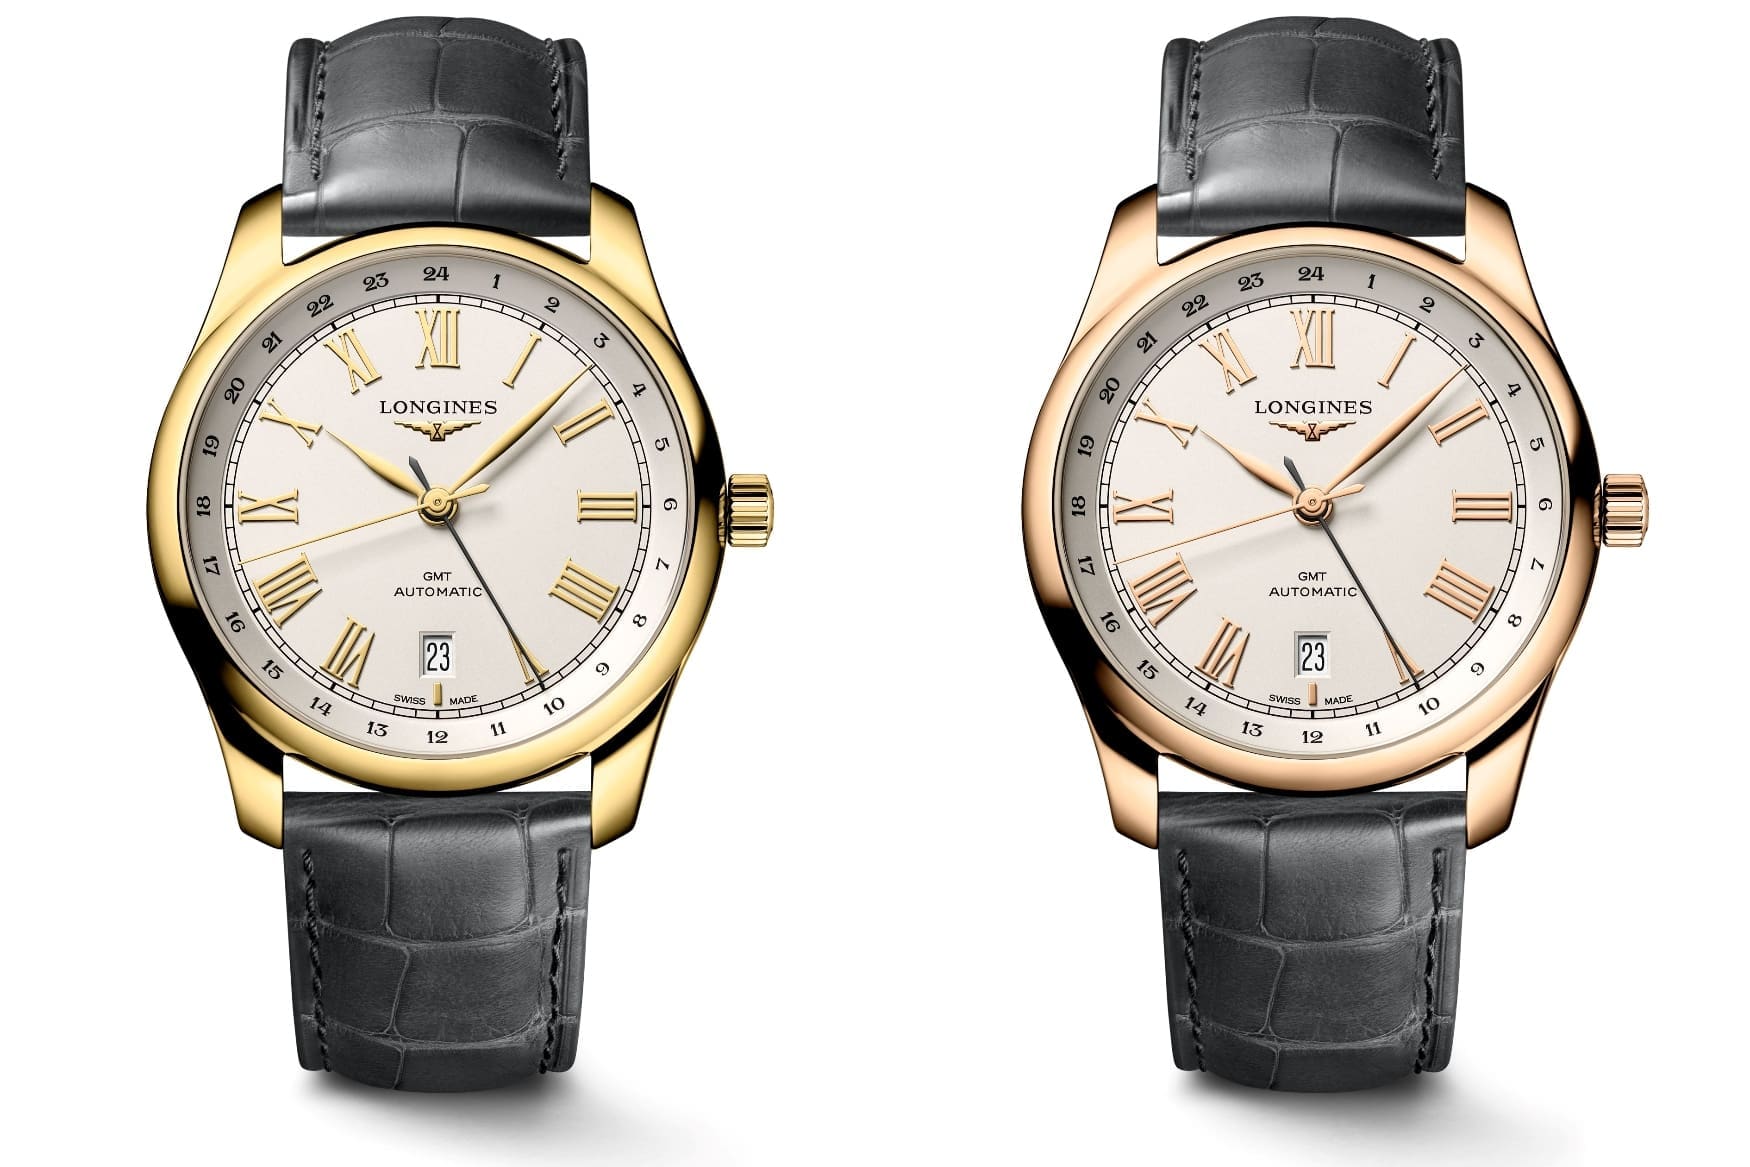 Longines Master Collection GMT models